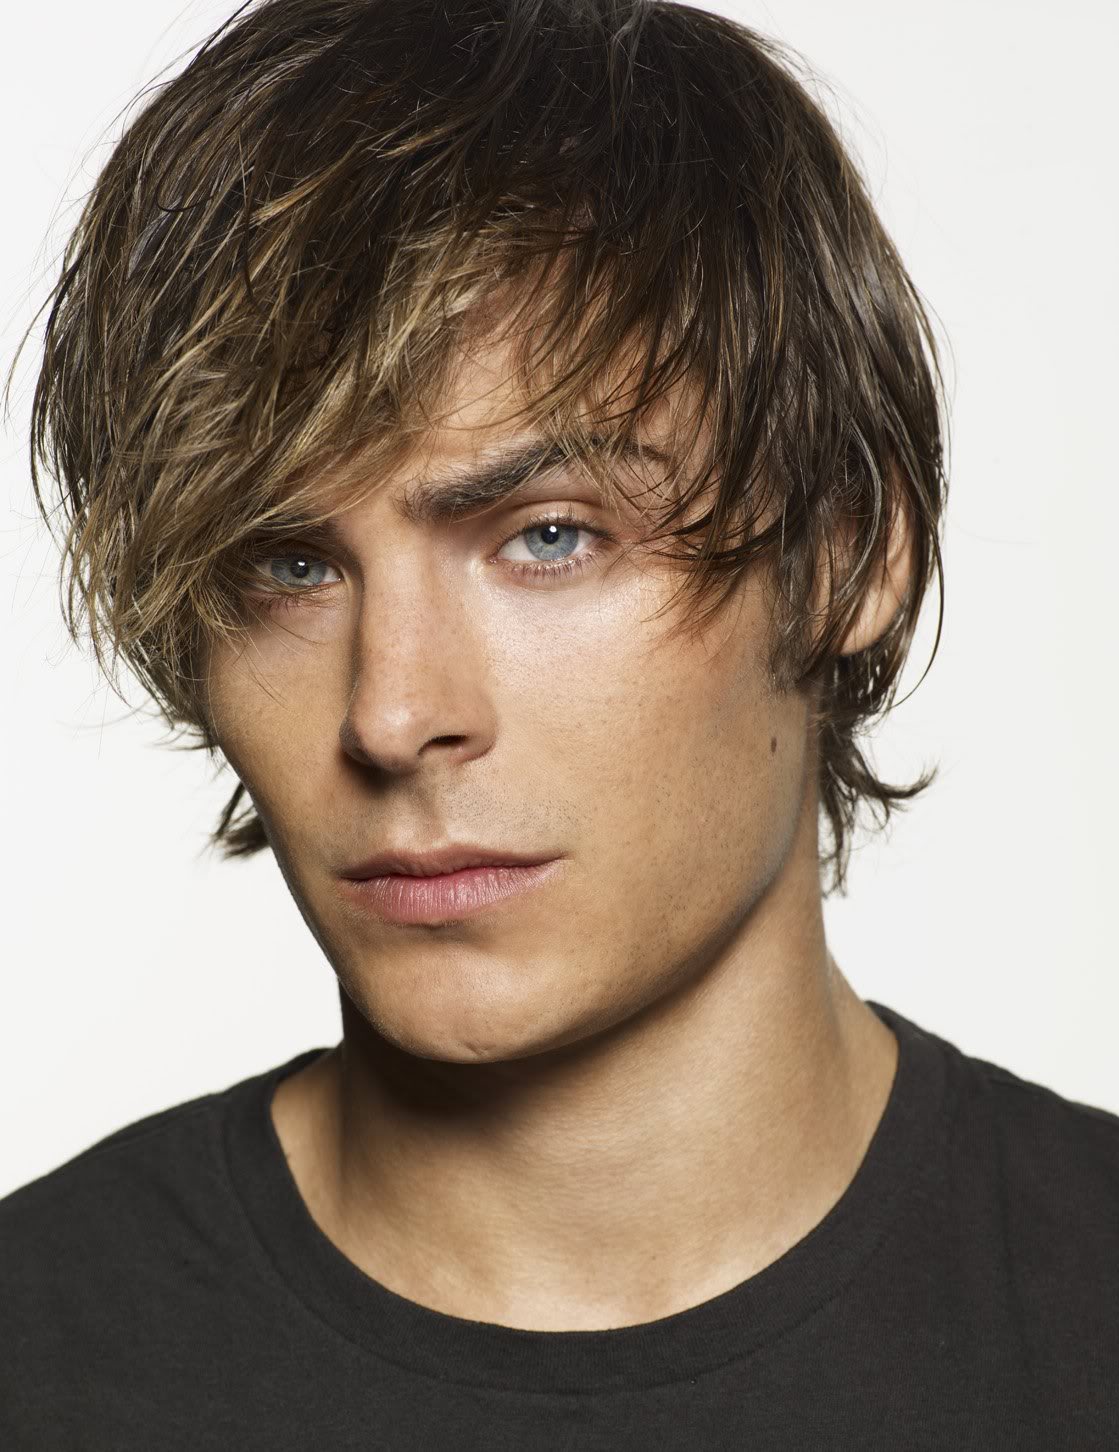 23+ Beautiful Long Hairstyle For Boy Pictures Hair style